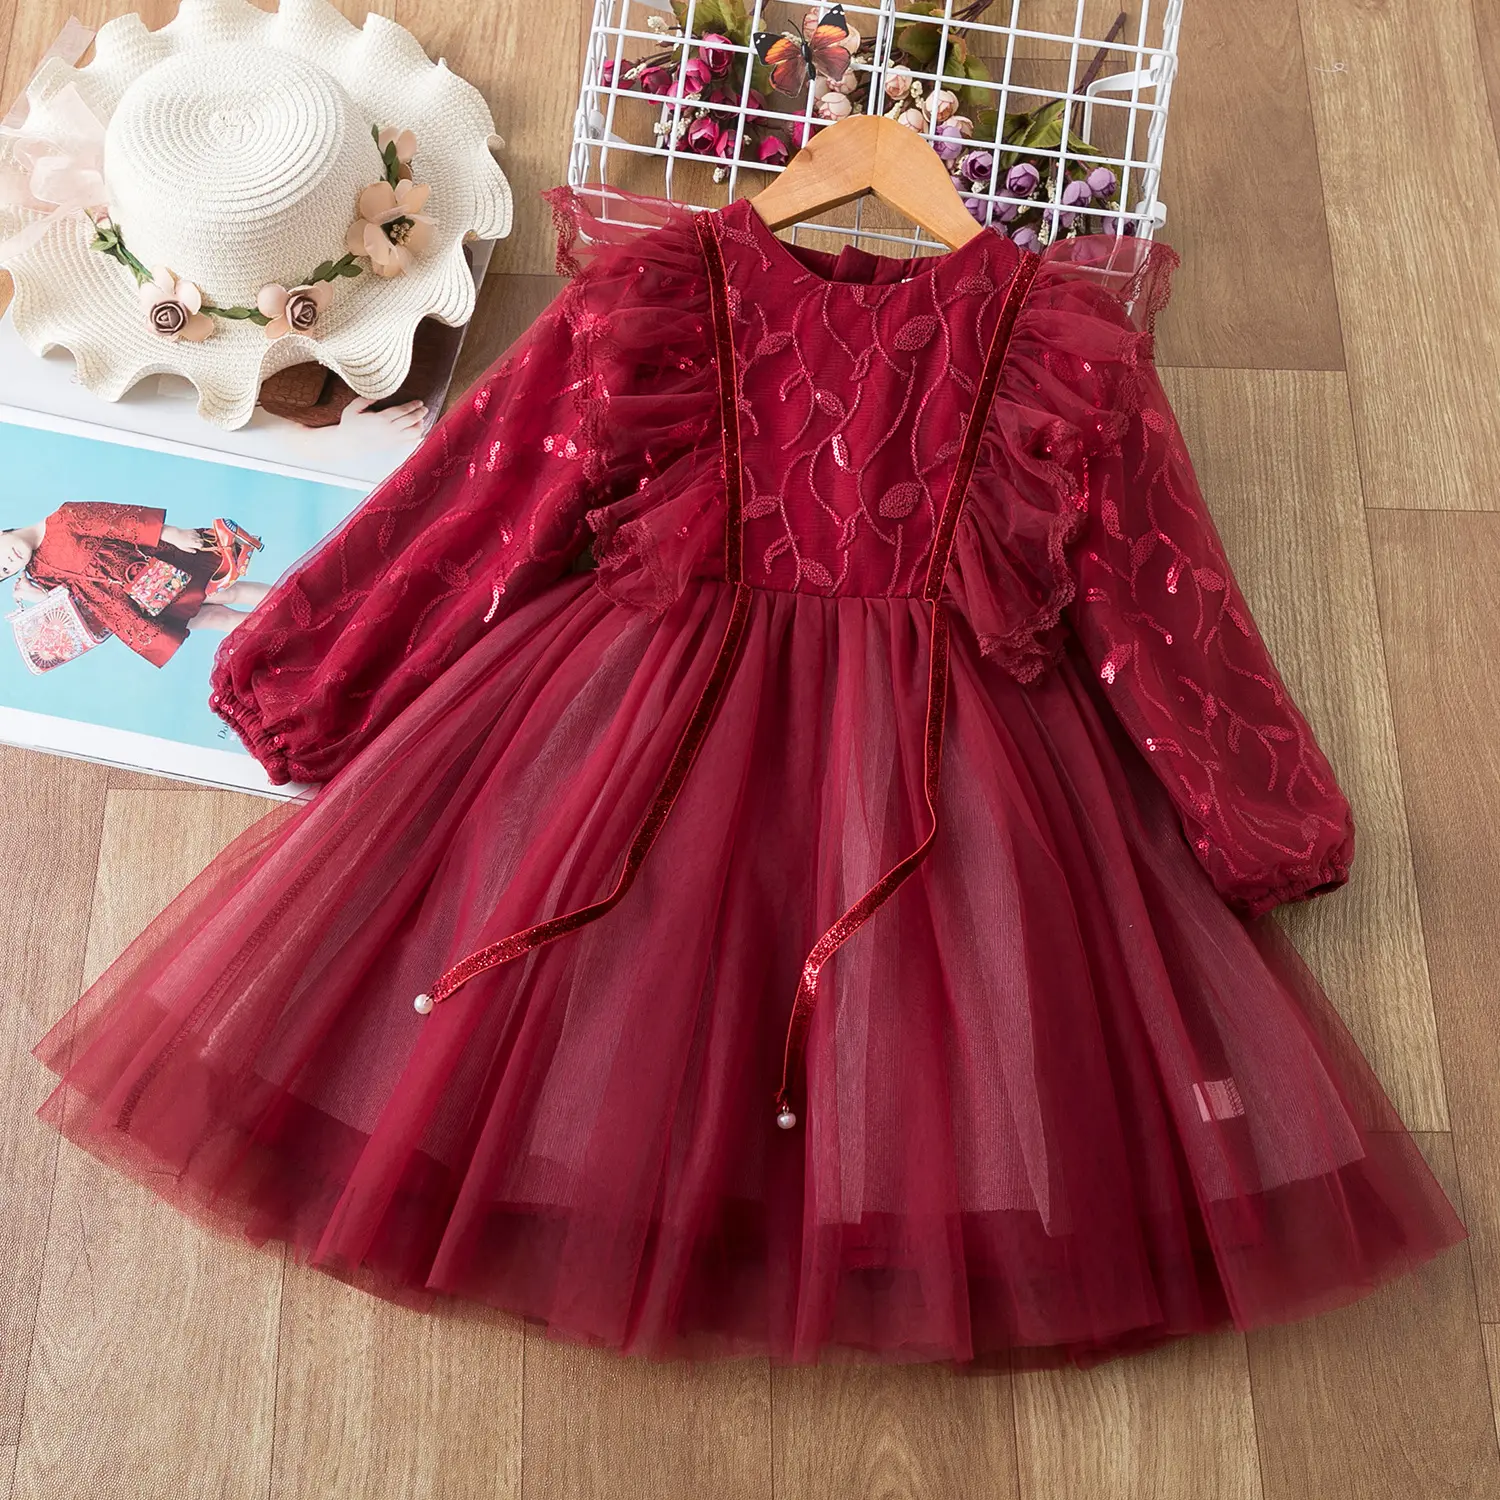 2023 Girls Princess Sequined Frock Costume Autumn Winter Long Sleeves Kids Clothes School Casual Baby Party Dress